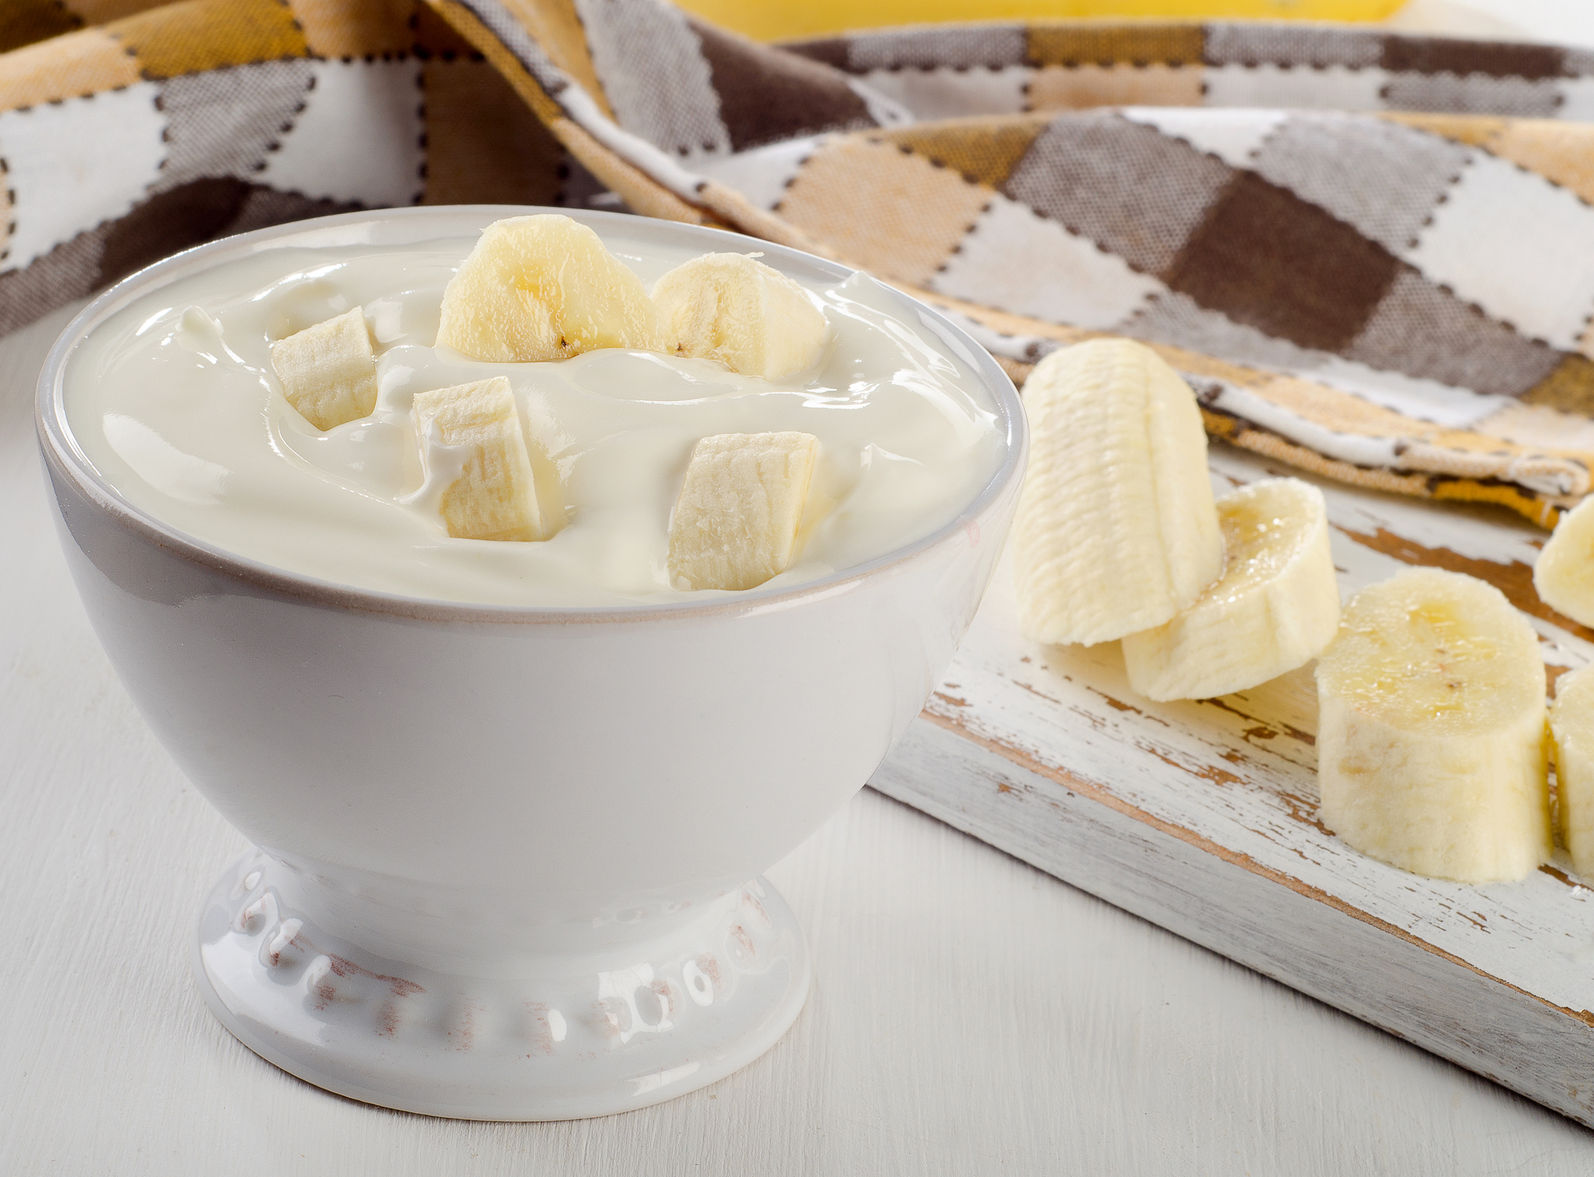 Yogurt with banana slices. https://www.info-on-high-blood-pressure.com/Eat-Right-For-Life.html